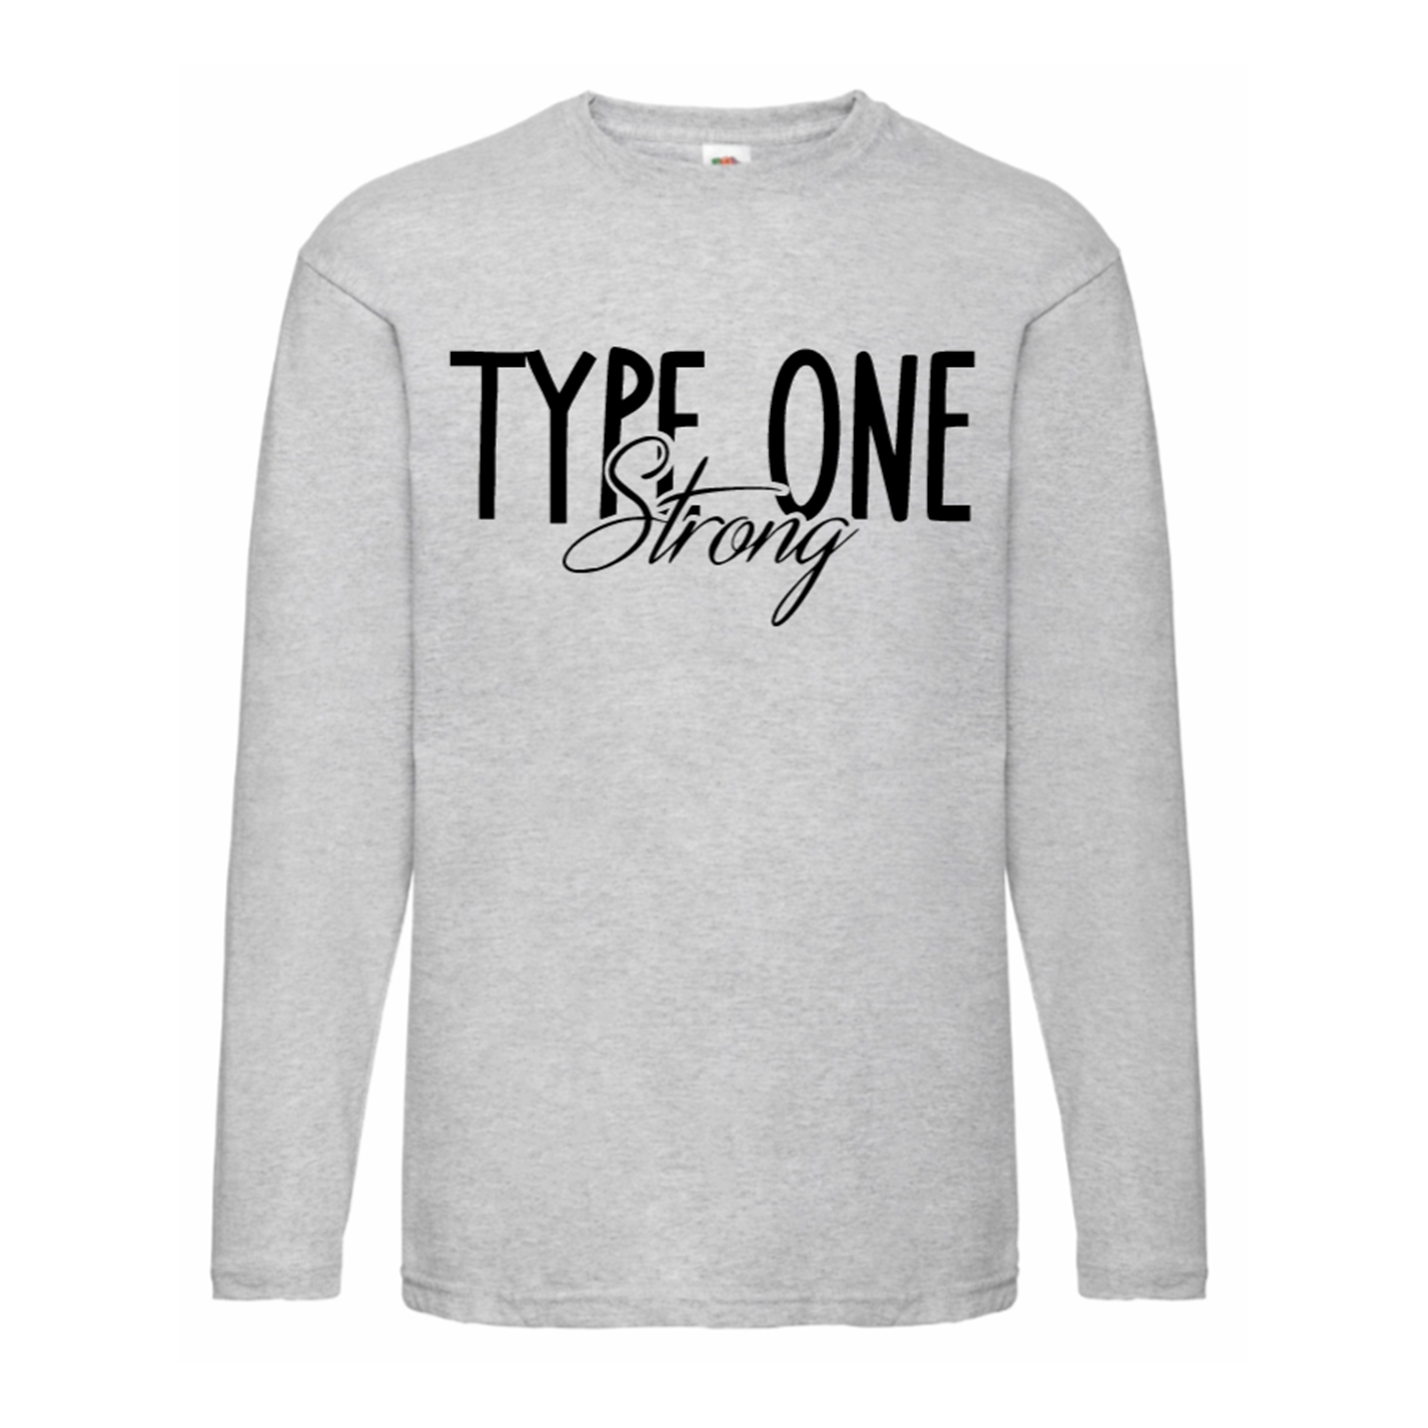 Type One Strong Long Sleeve T Shirt